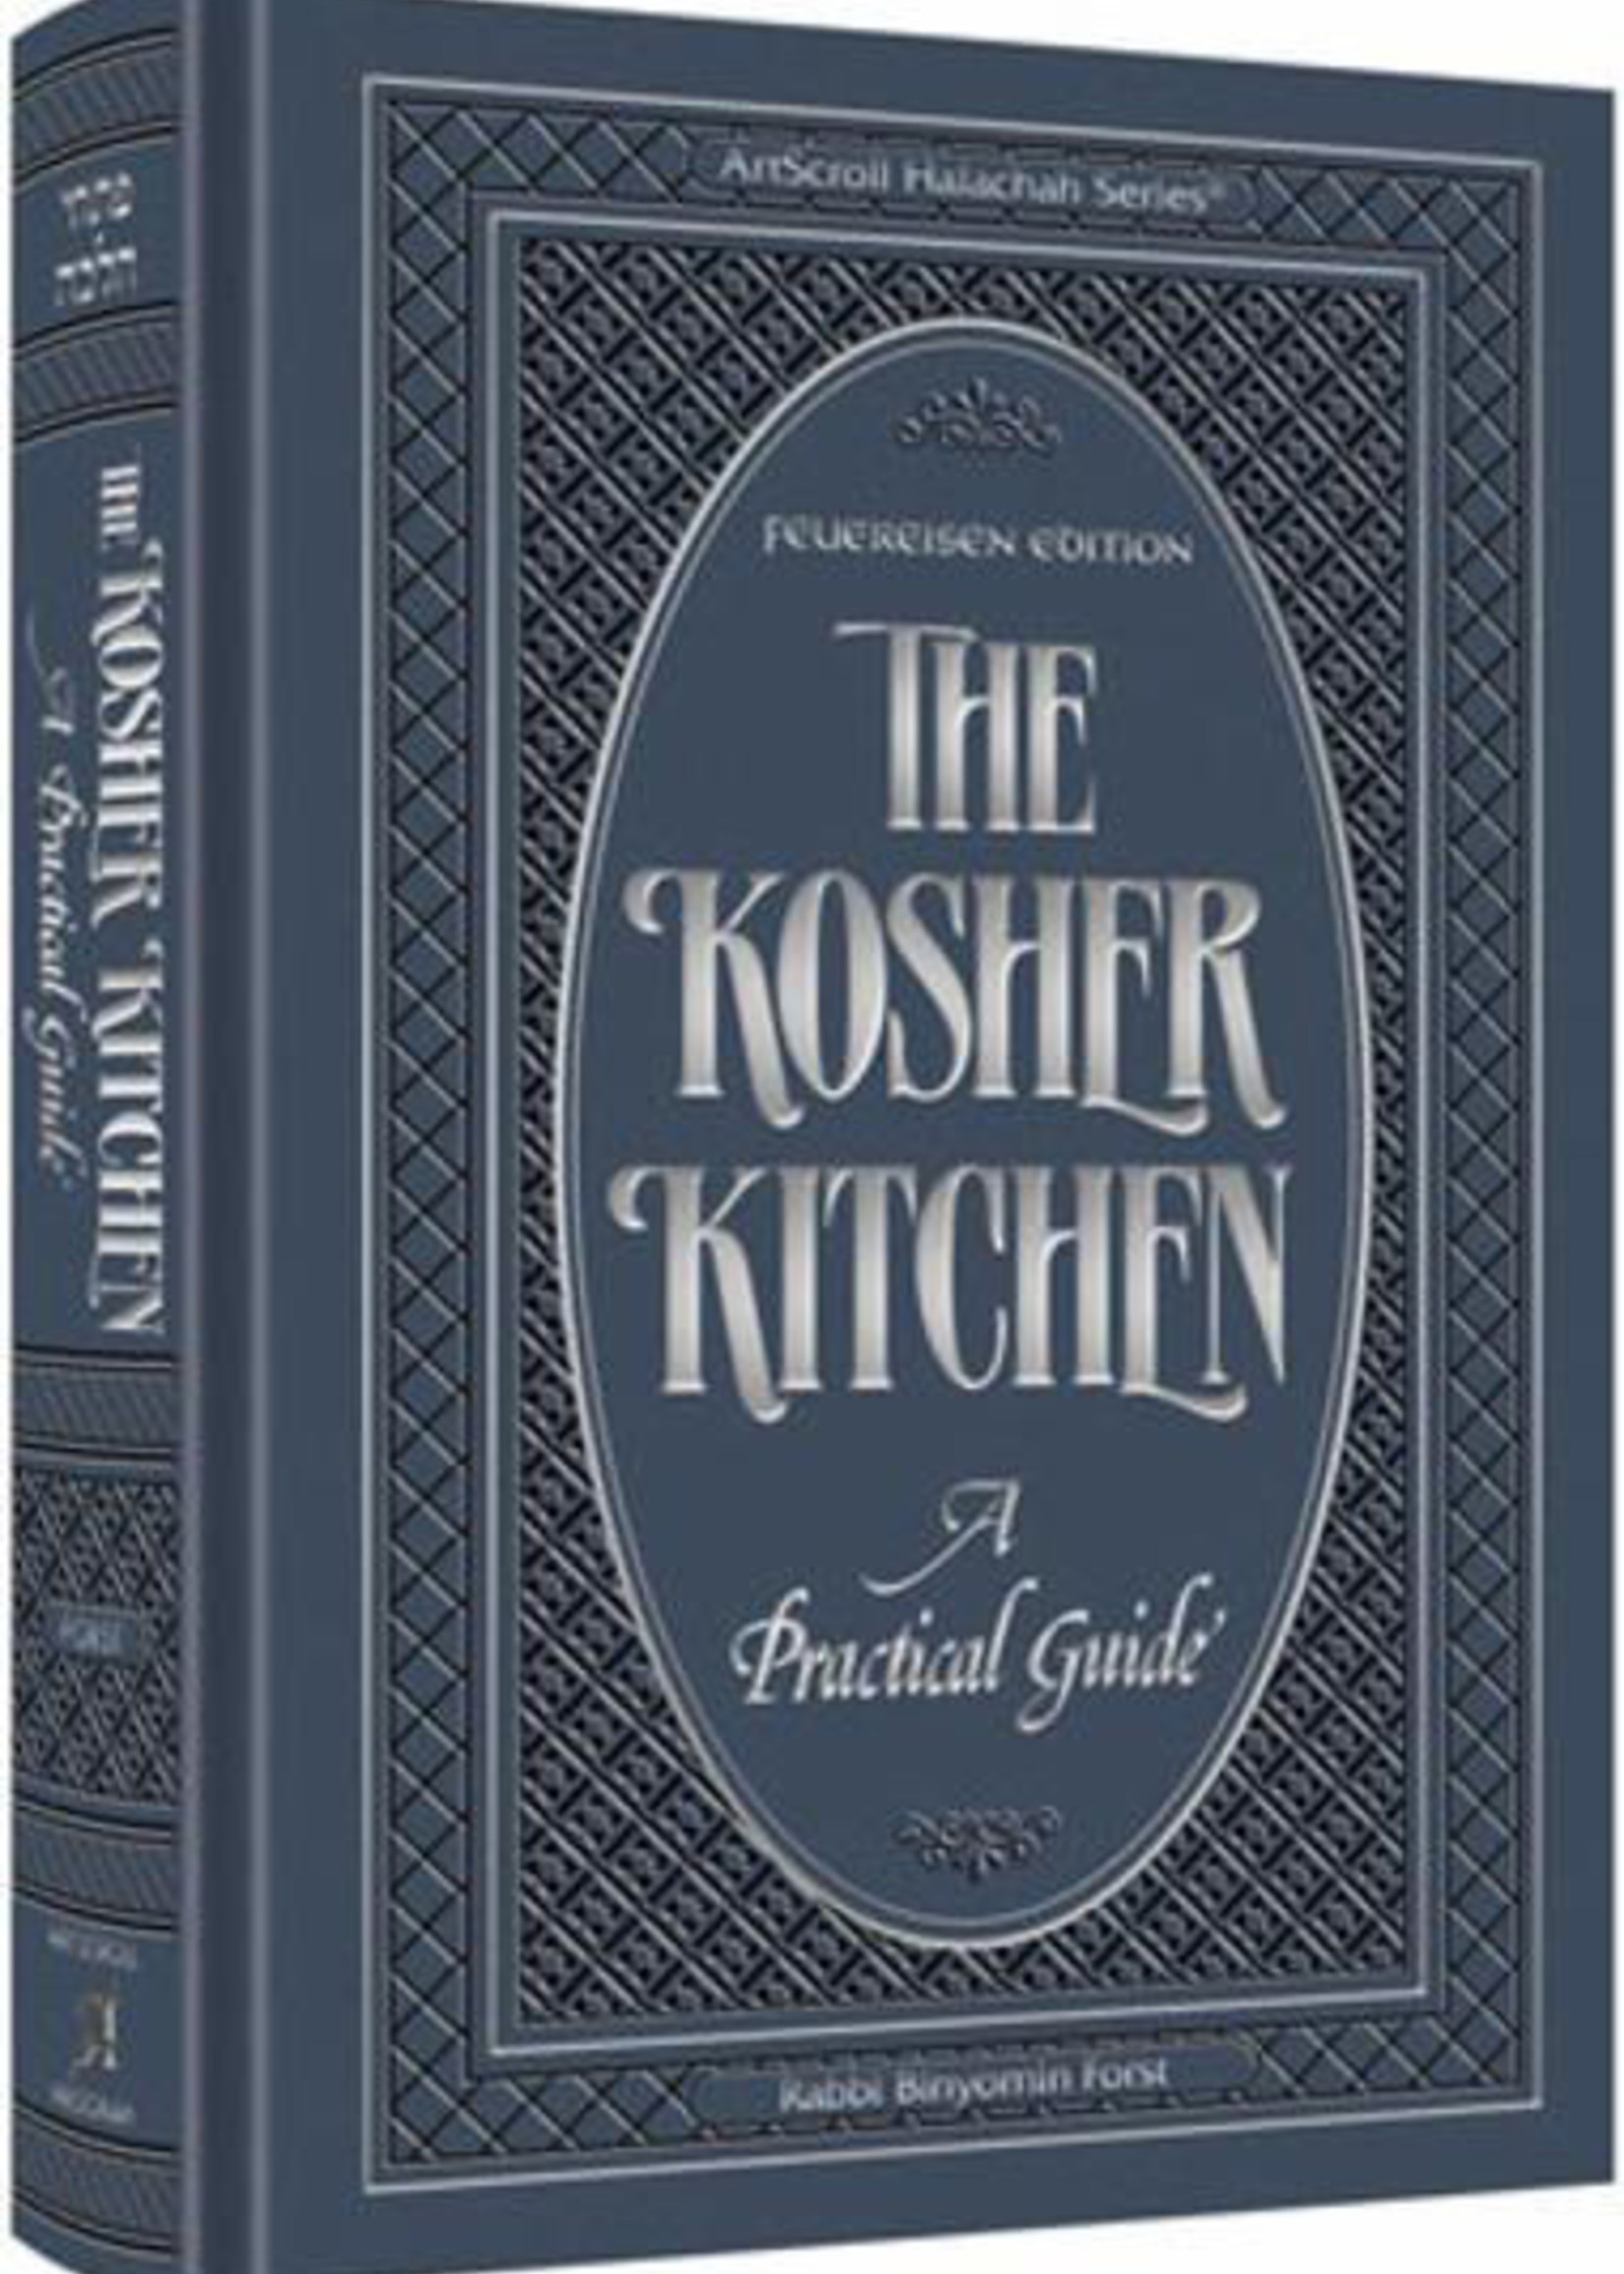 The Kosher Kitchen - A Practical Guide